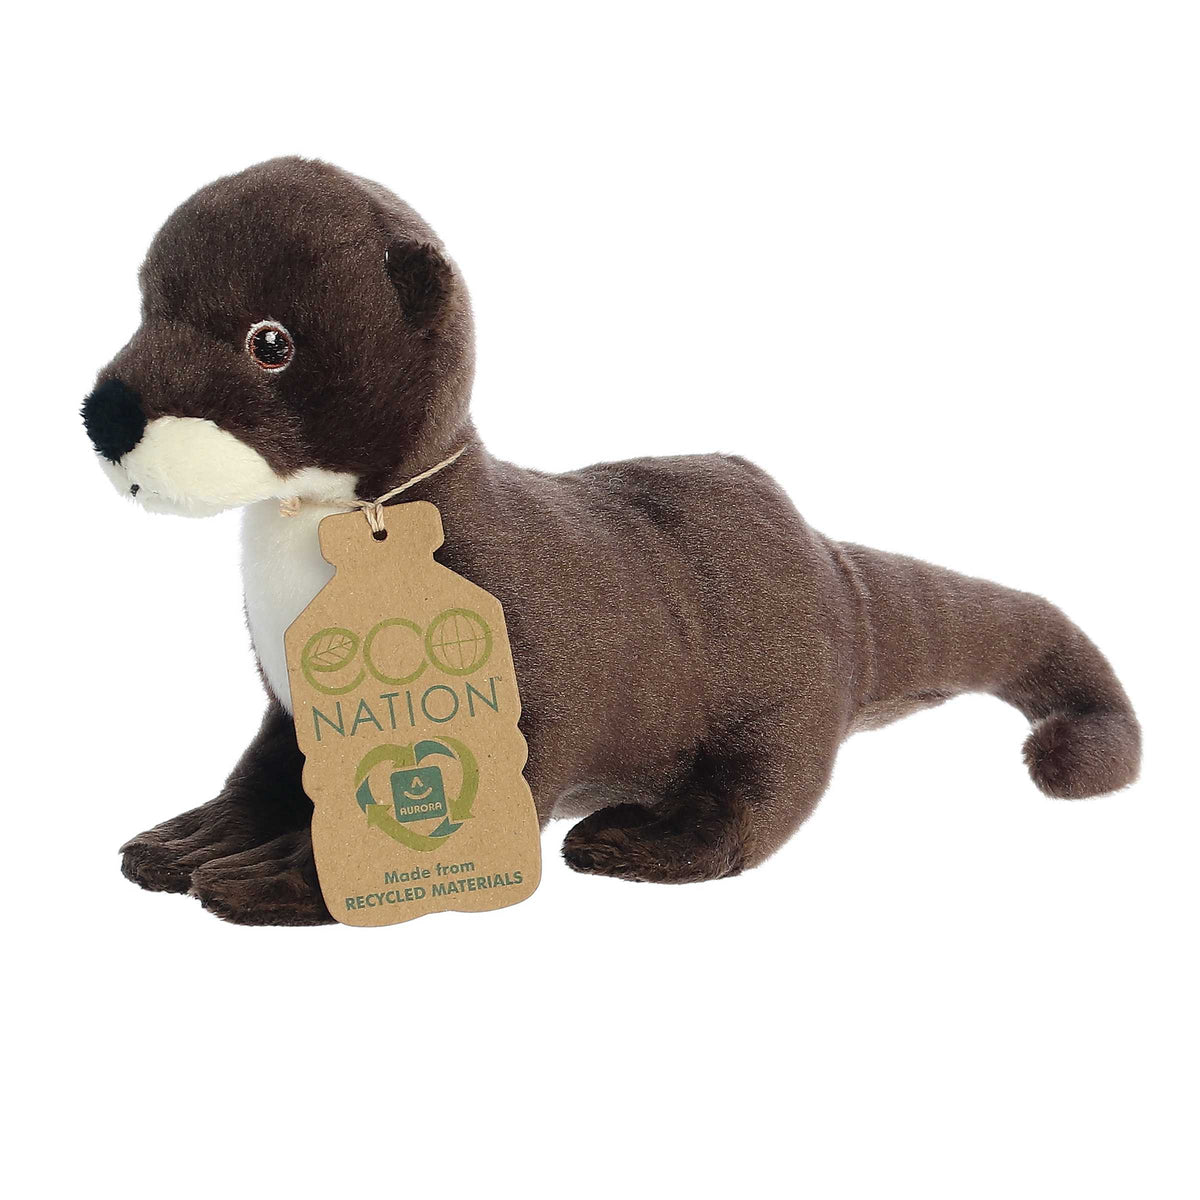 Eco Softie River Otter Plush, velvety brown fur, made from recycled materials, carrying the iconic 'Eco Nation' tag.